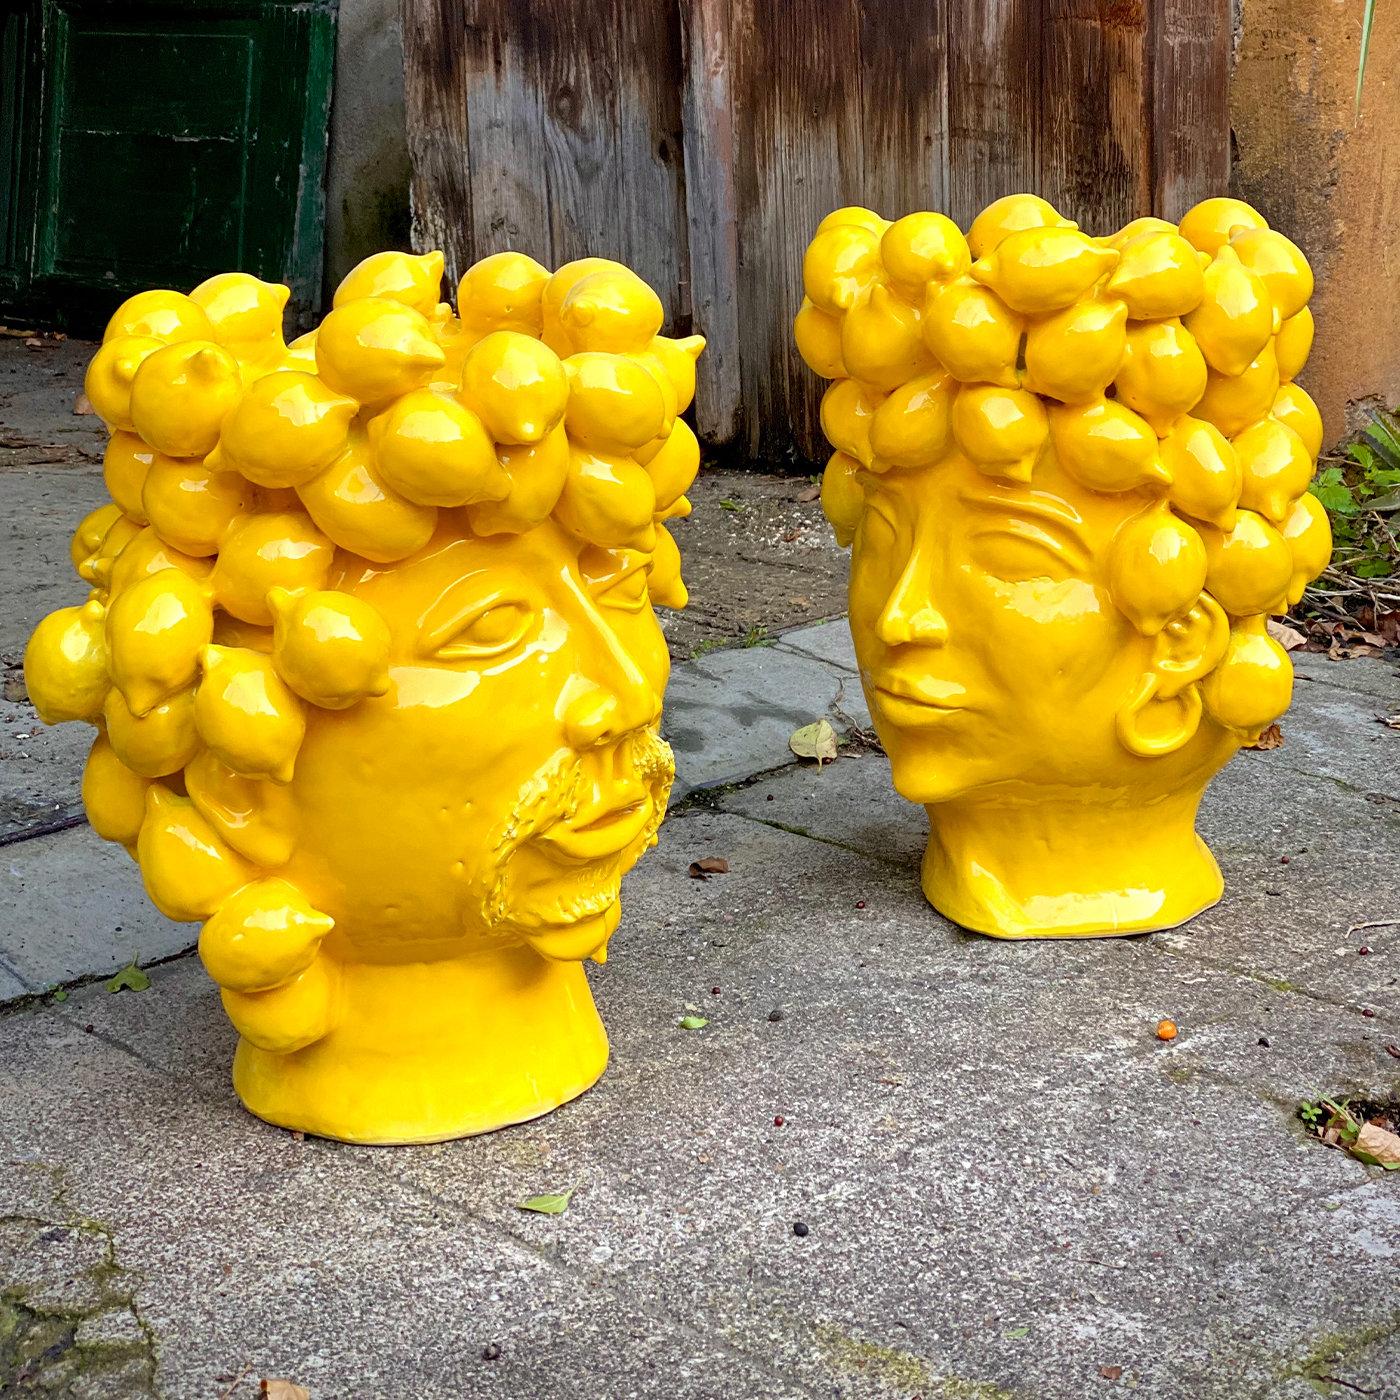 An explosion of solid yellow glaze envelopes the minutely detailed silhouette of this glamorous ceramic head, stunning piece to host flowers, plants, or to simply make an impactful statement on its own in living rooms or gardens, alike. Playfully